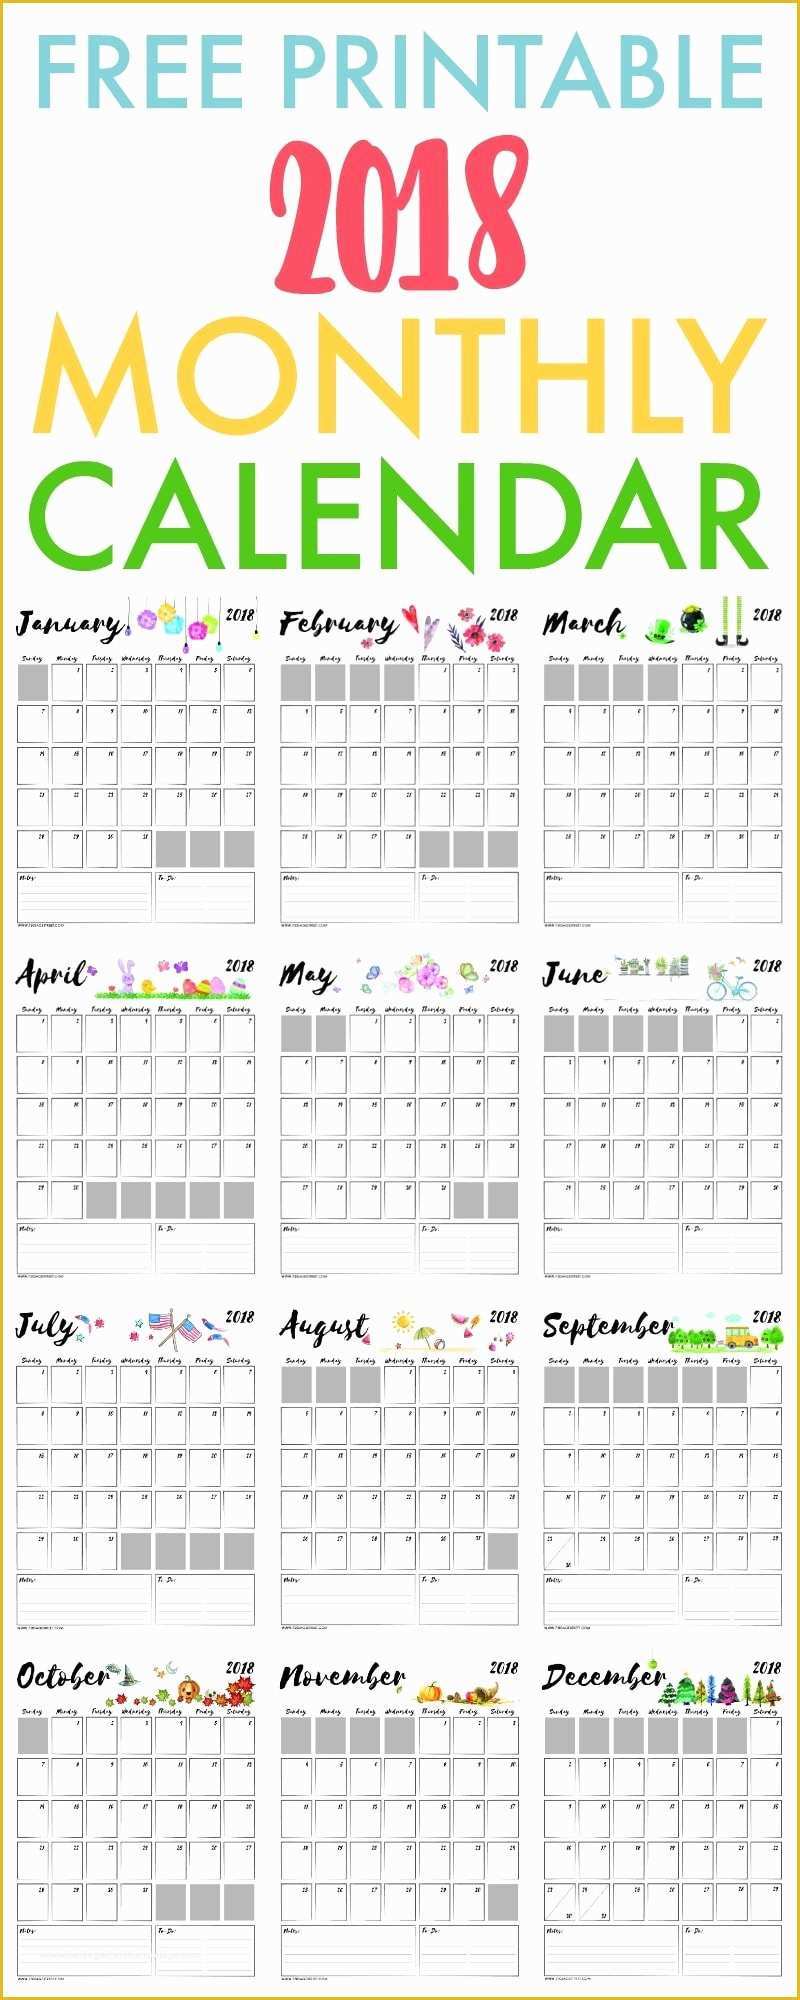 Free Downloadable Calendar Template Of Free Printable Calendar 2018 Free Pdf Monthly Calendar